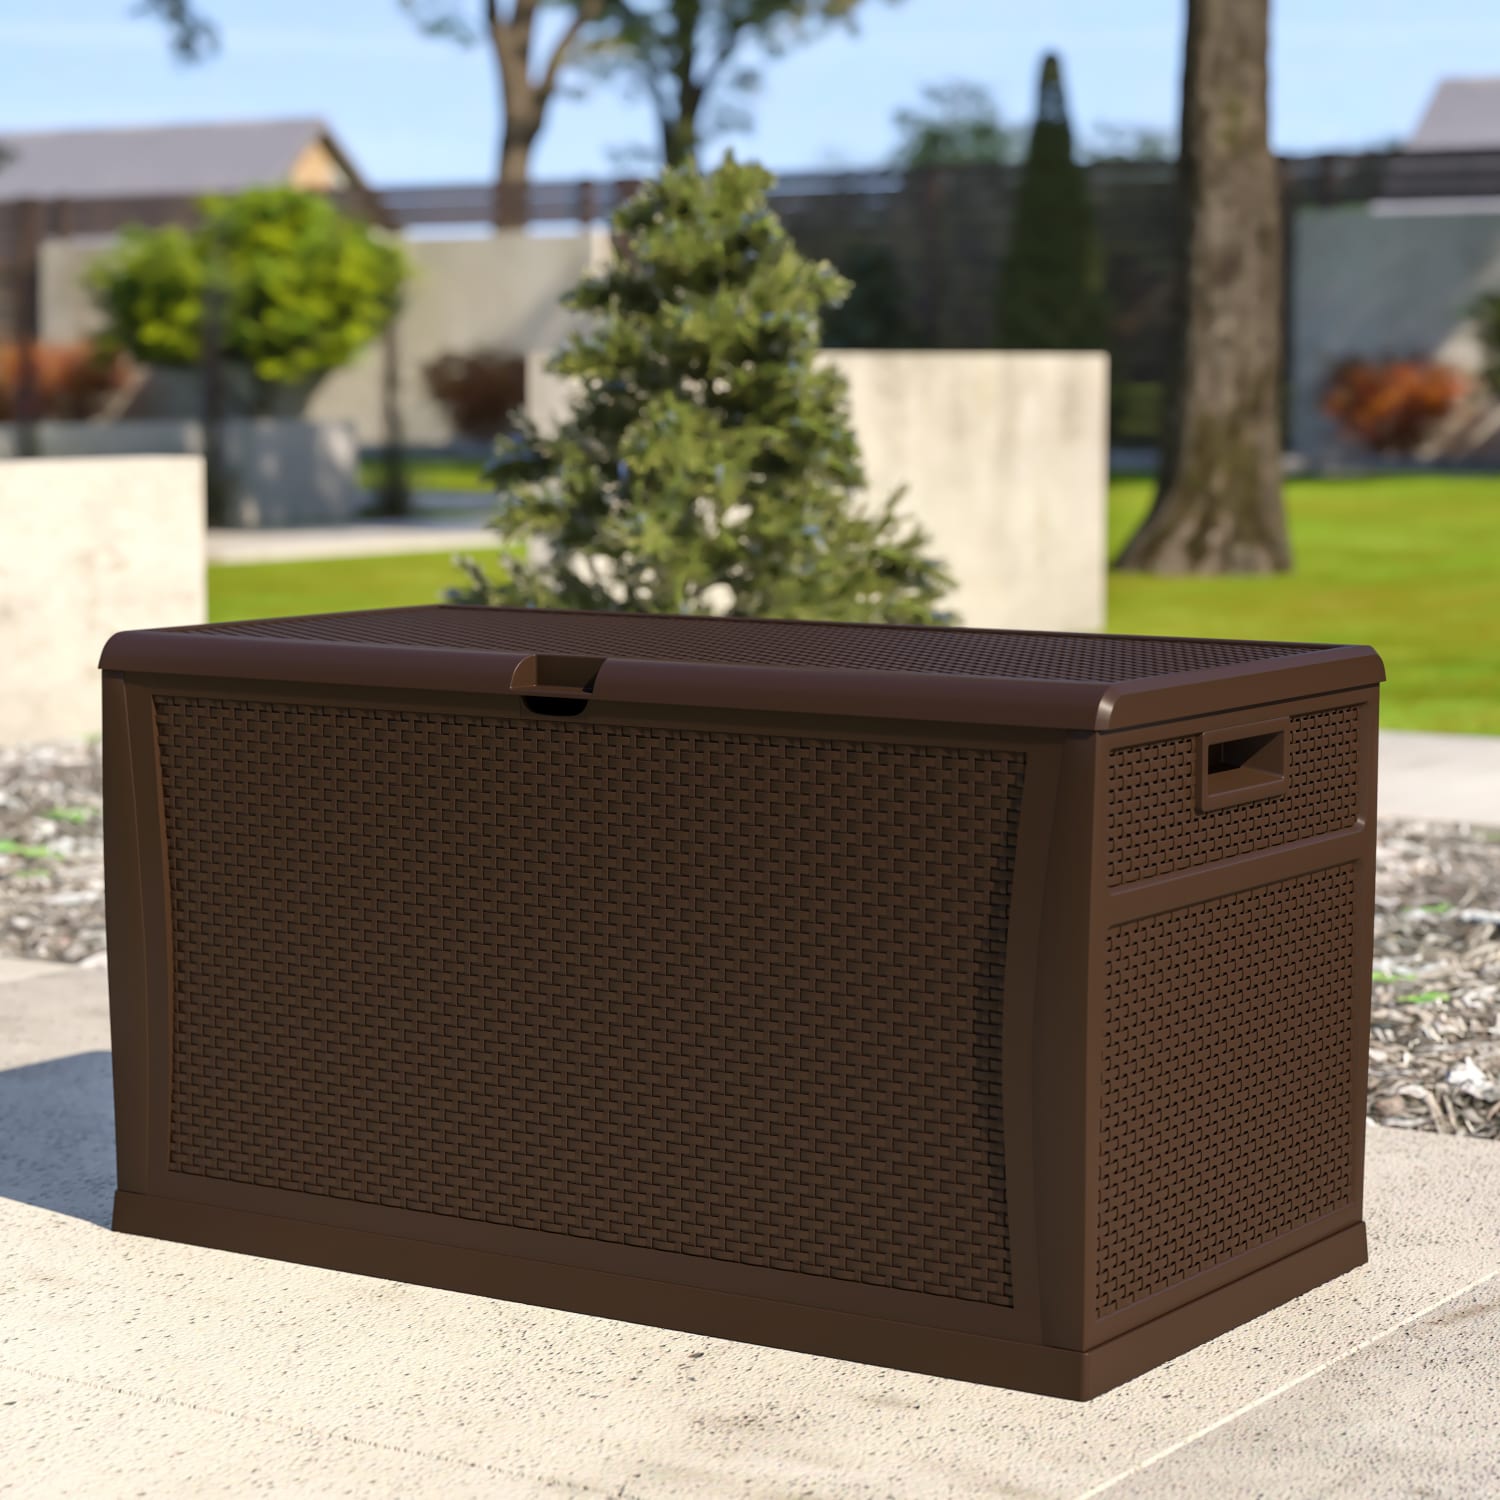 120 Gallon Plastic Deck Box - Outdoor Waterproof Storage Box for Patio Cushions, Garden Tools and Pool Toys, Brown - QTKTL4023BRNGG